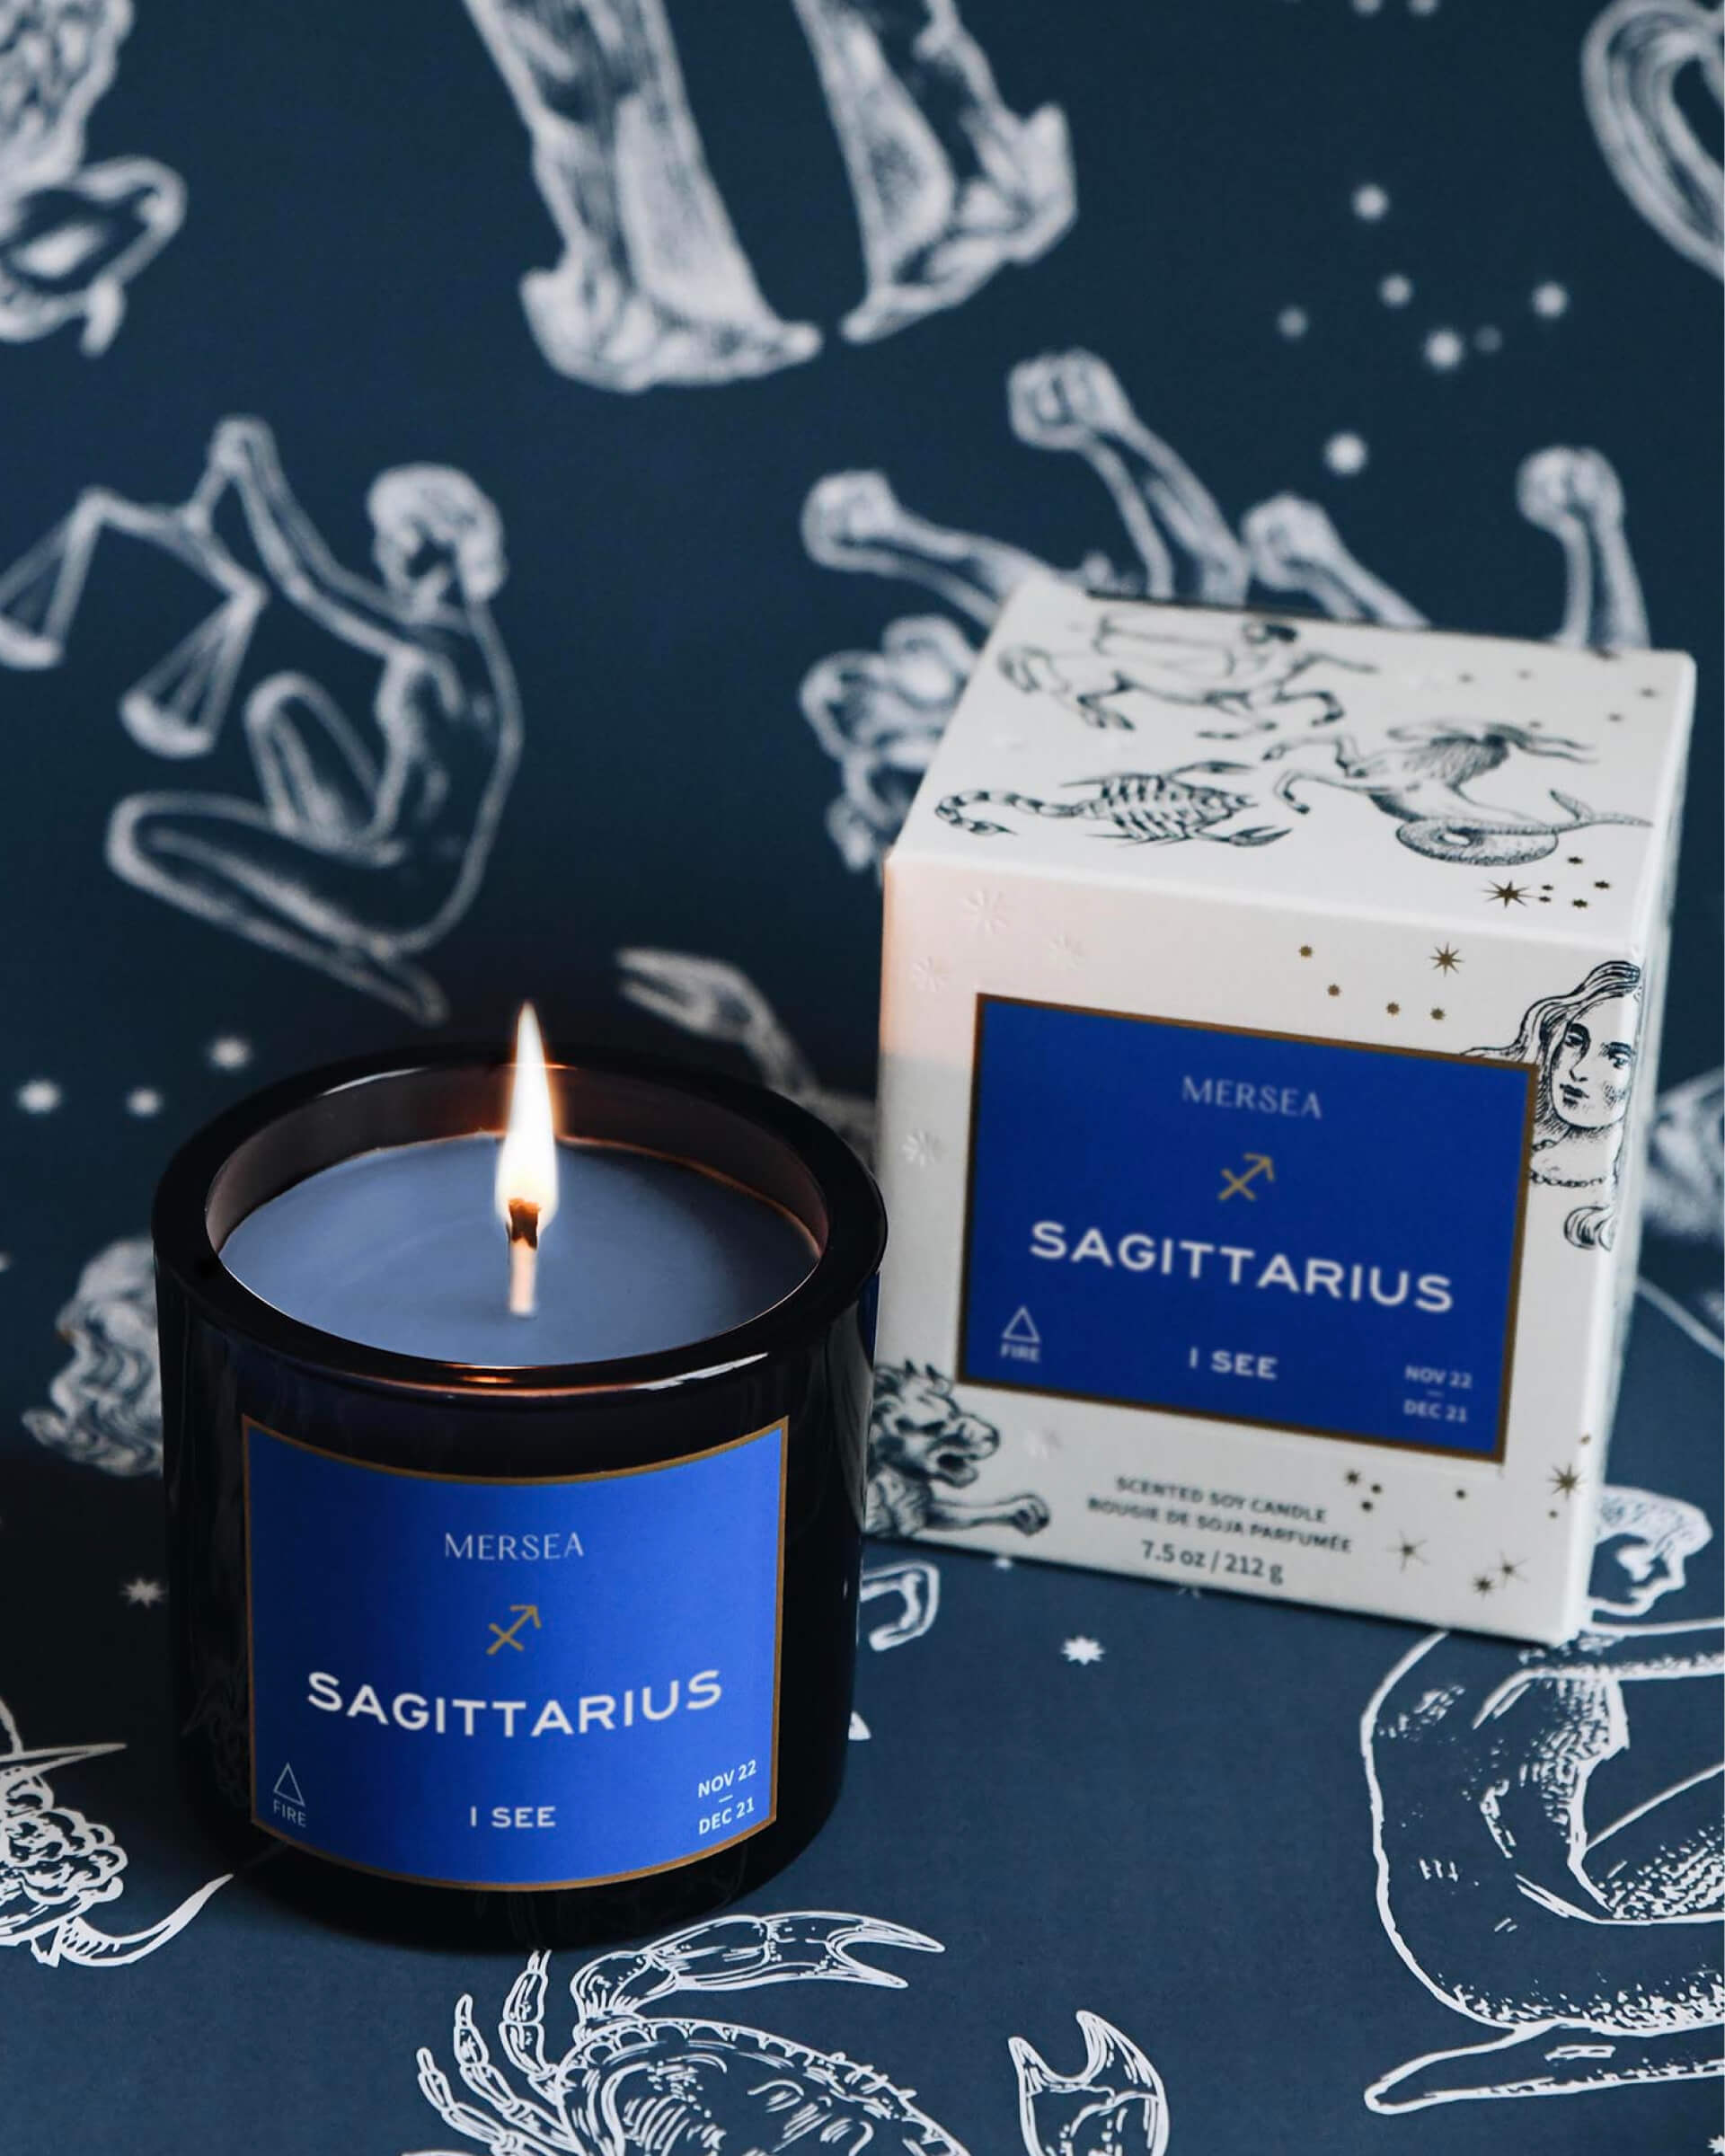 Mersea Sagittarius scented candle displayed beside its accompanying box, set against an astrology sign-themed backdrop